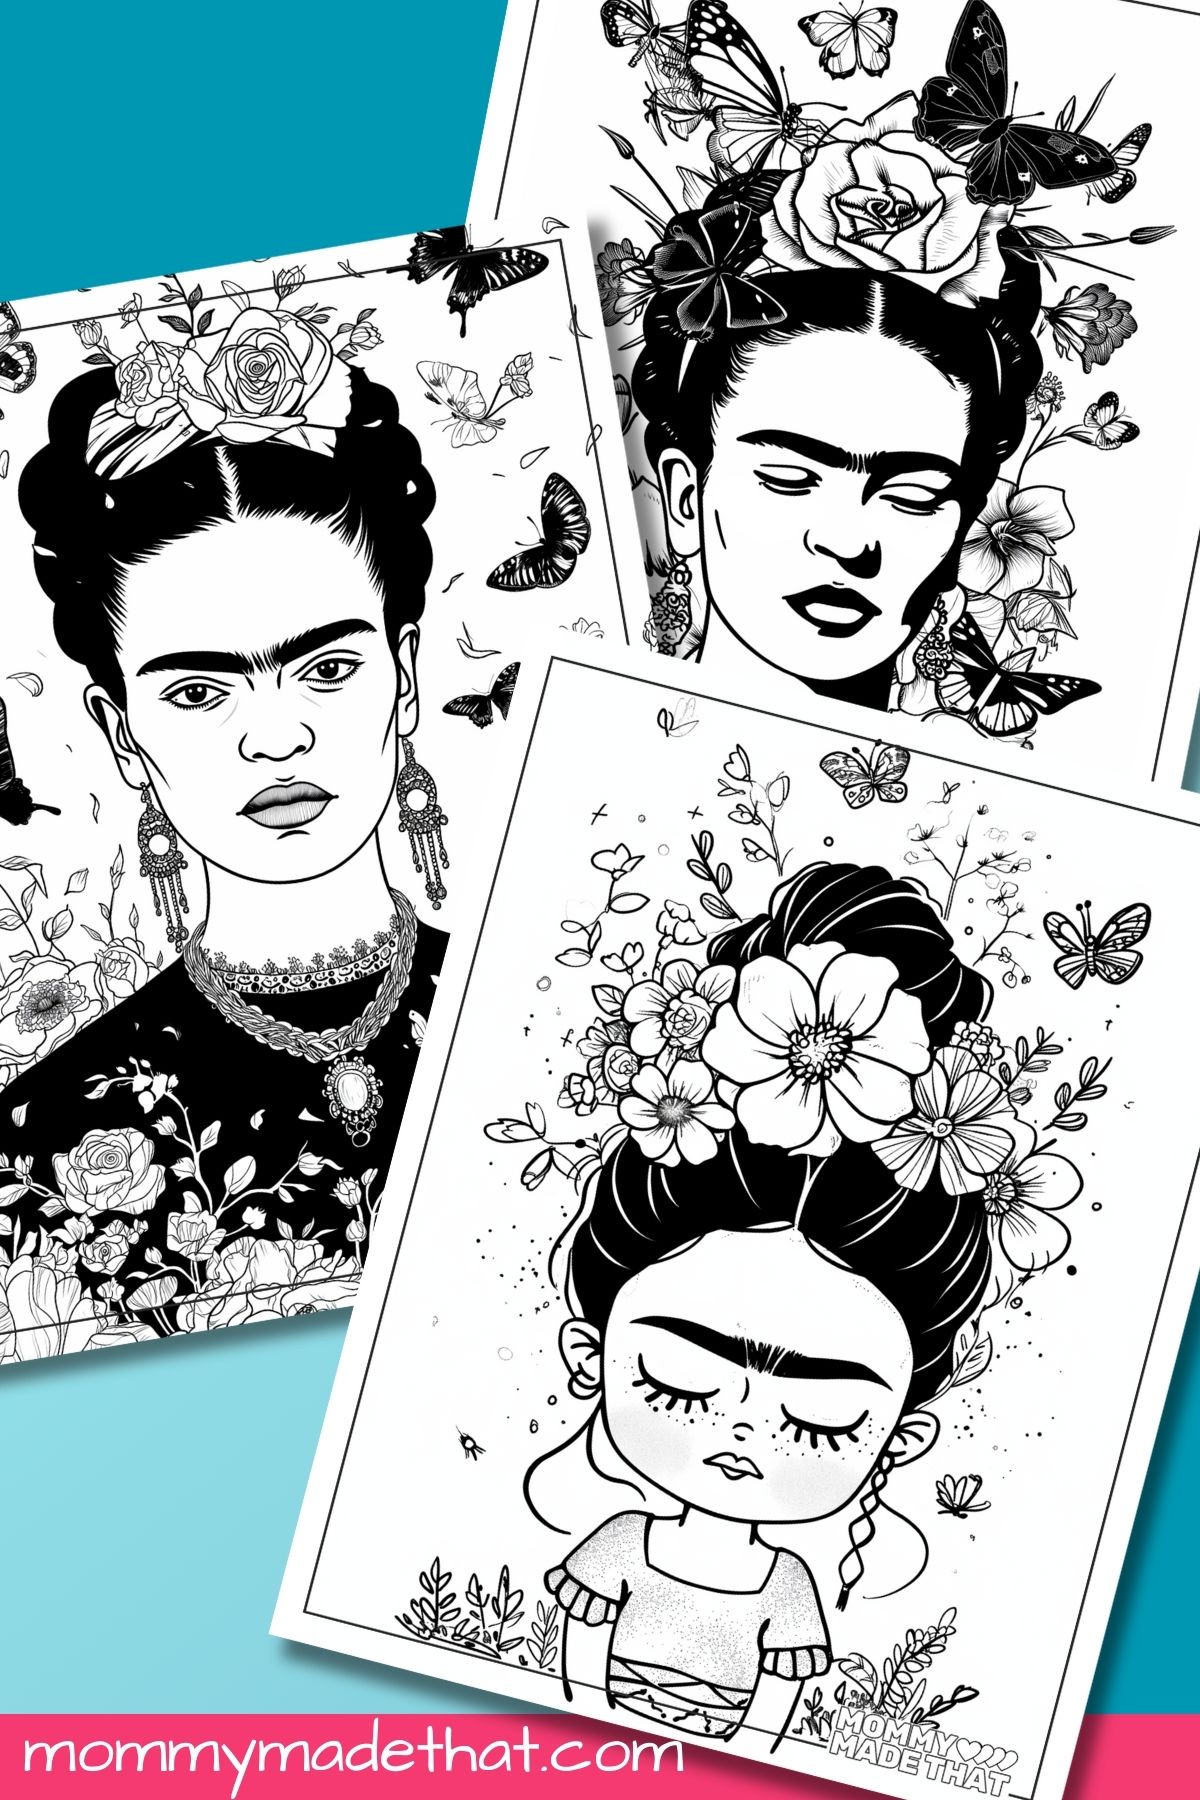 Frida Kahlo coloring pages.